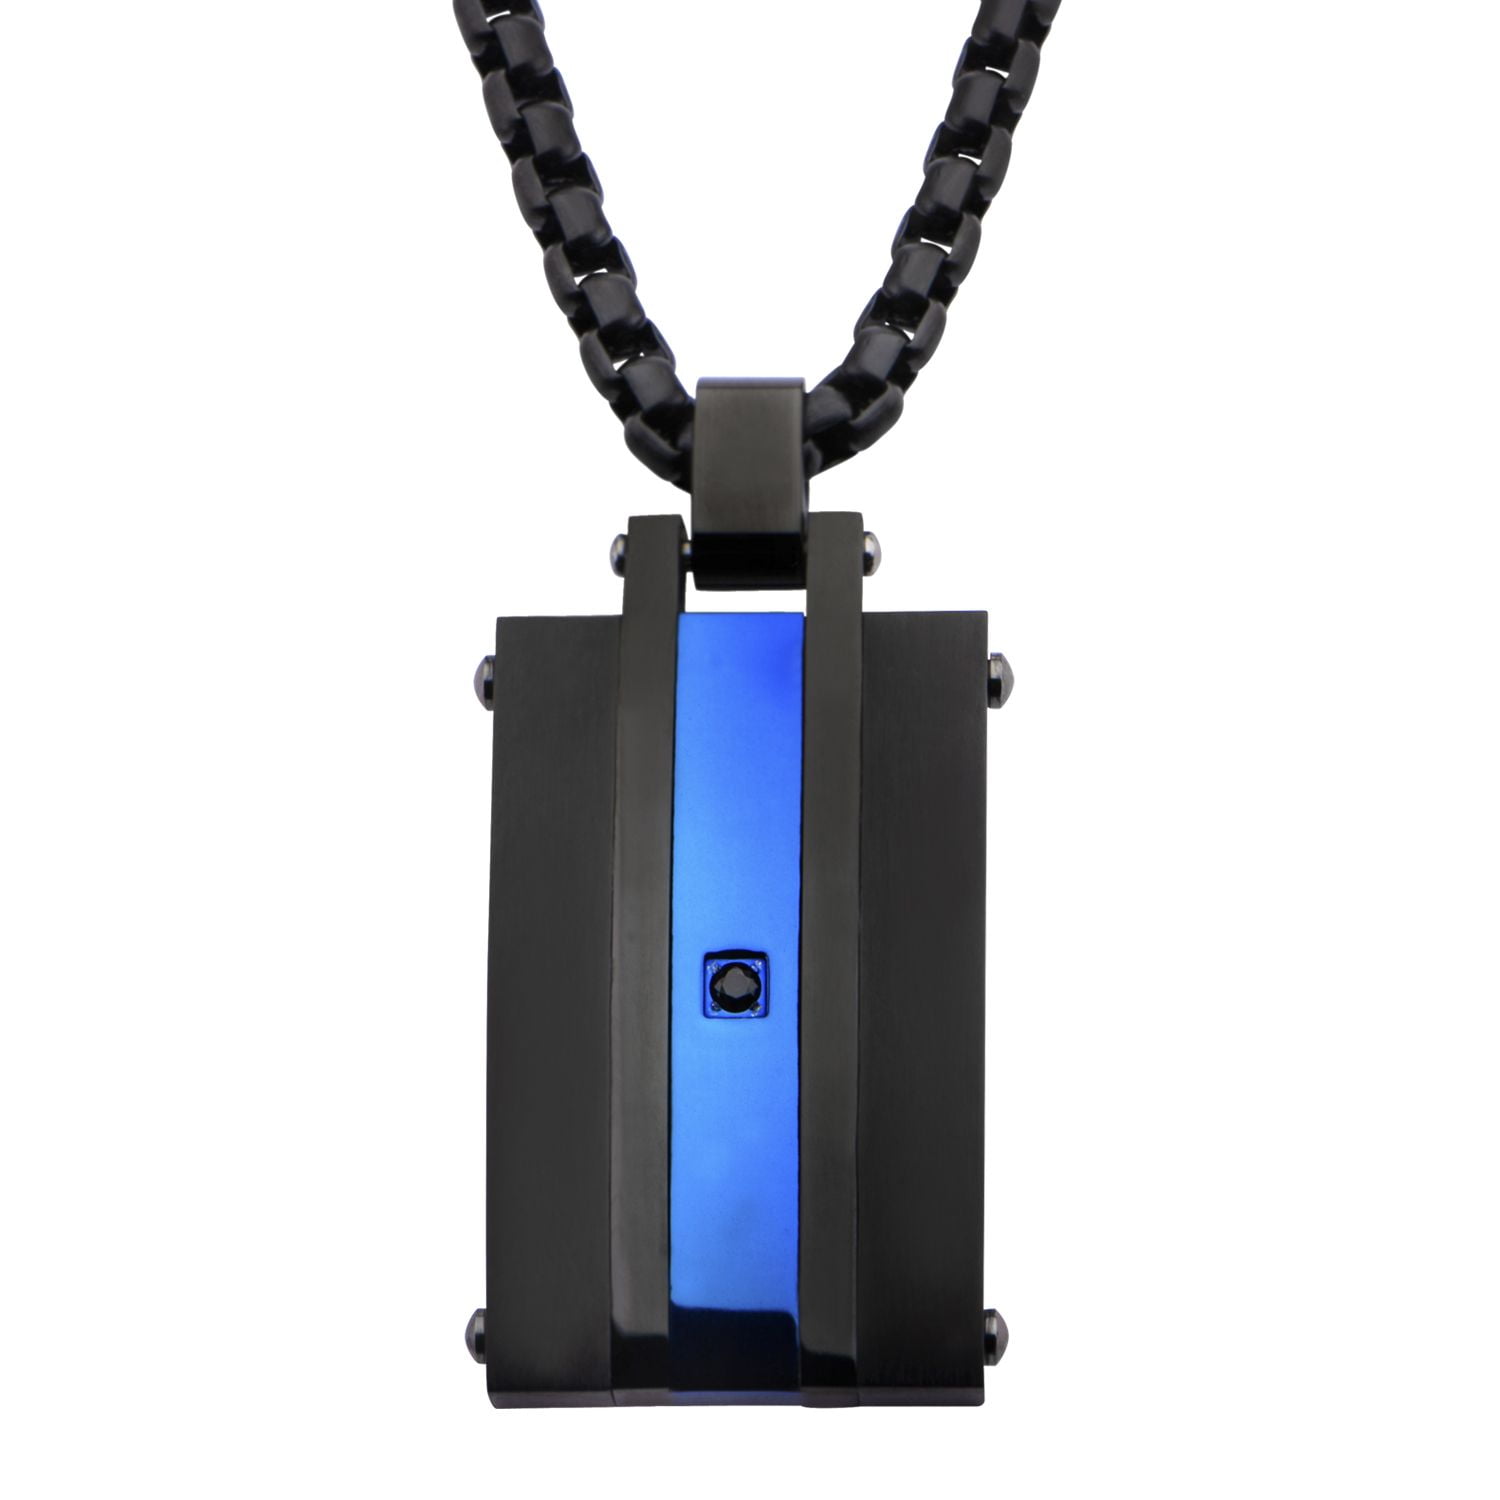 INOX Jewelry Double Sided Stainless Steel Black IP & Blue IP